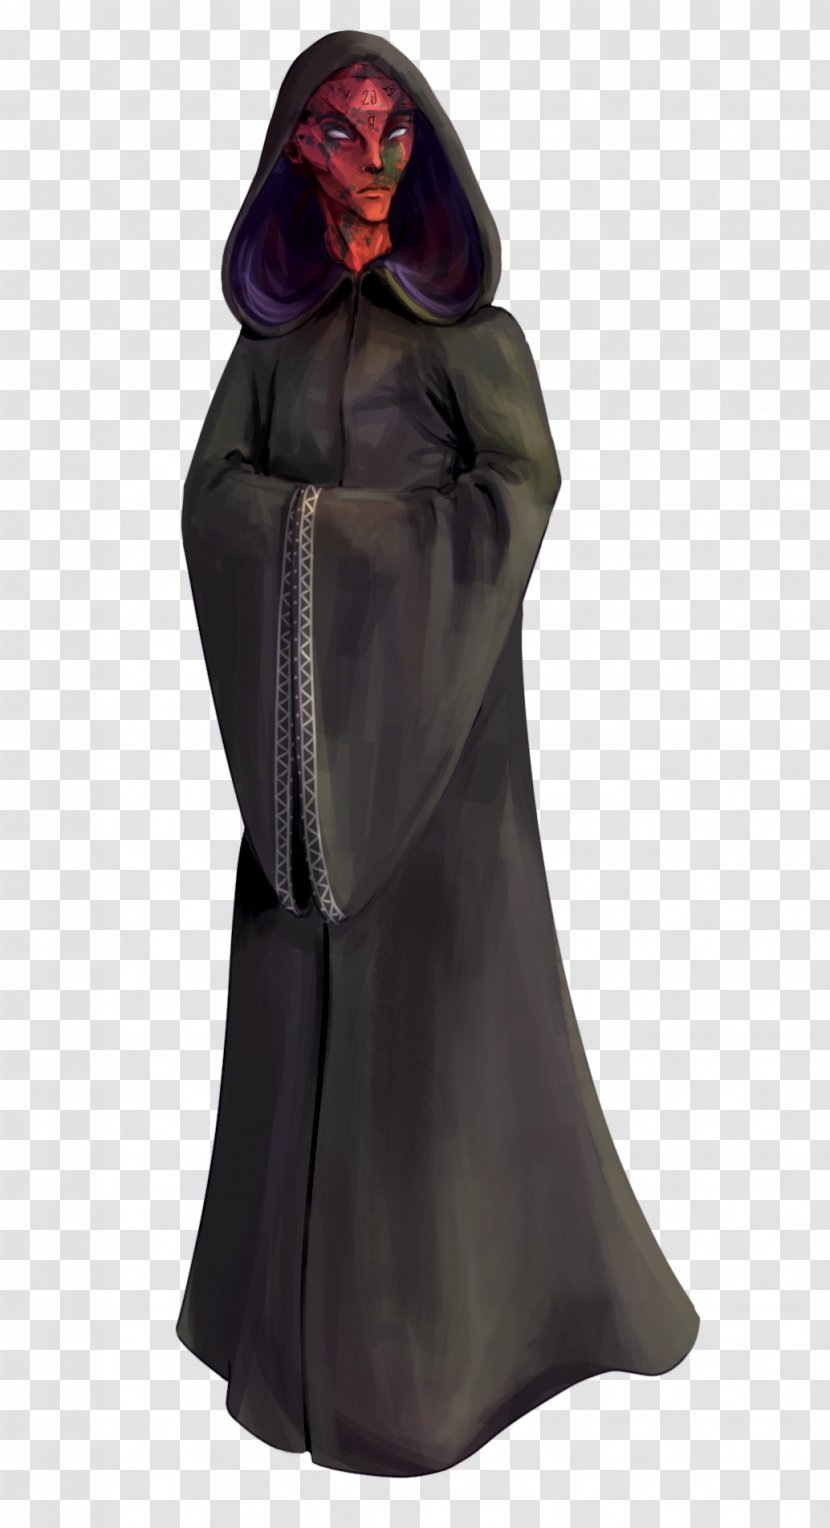 Outerwear - Costume Transparent PNG